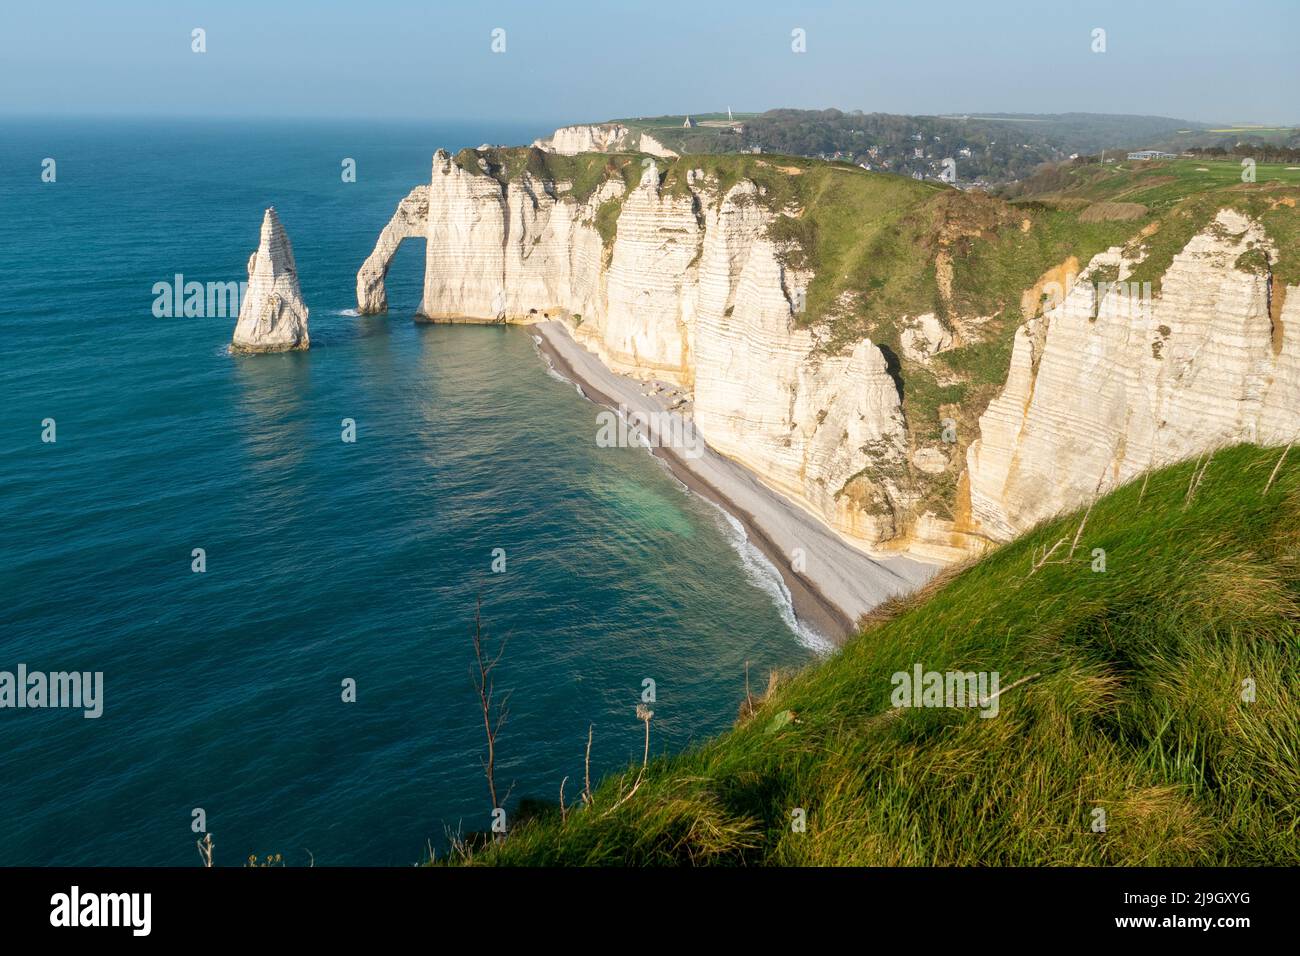 The cliff of Falaise d'Aval in Etretat,  in the Normandy region of Northwestern France Stock Photo